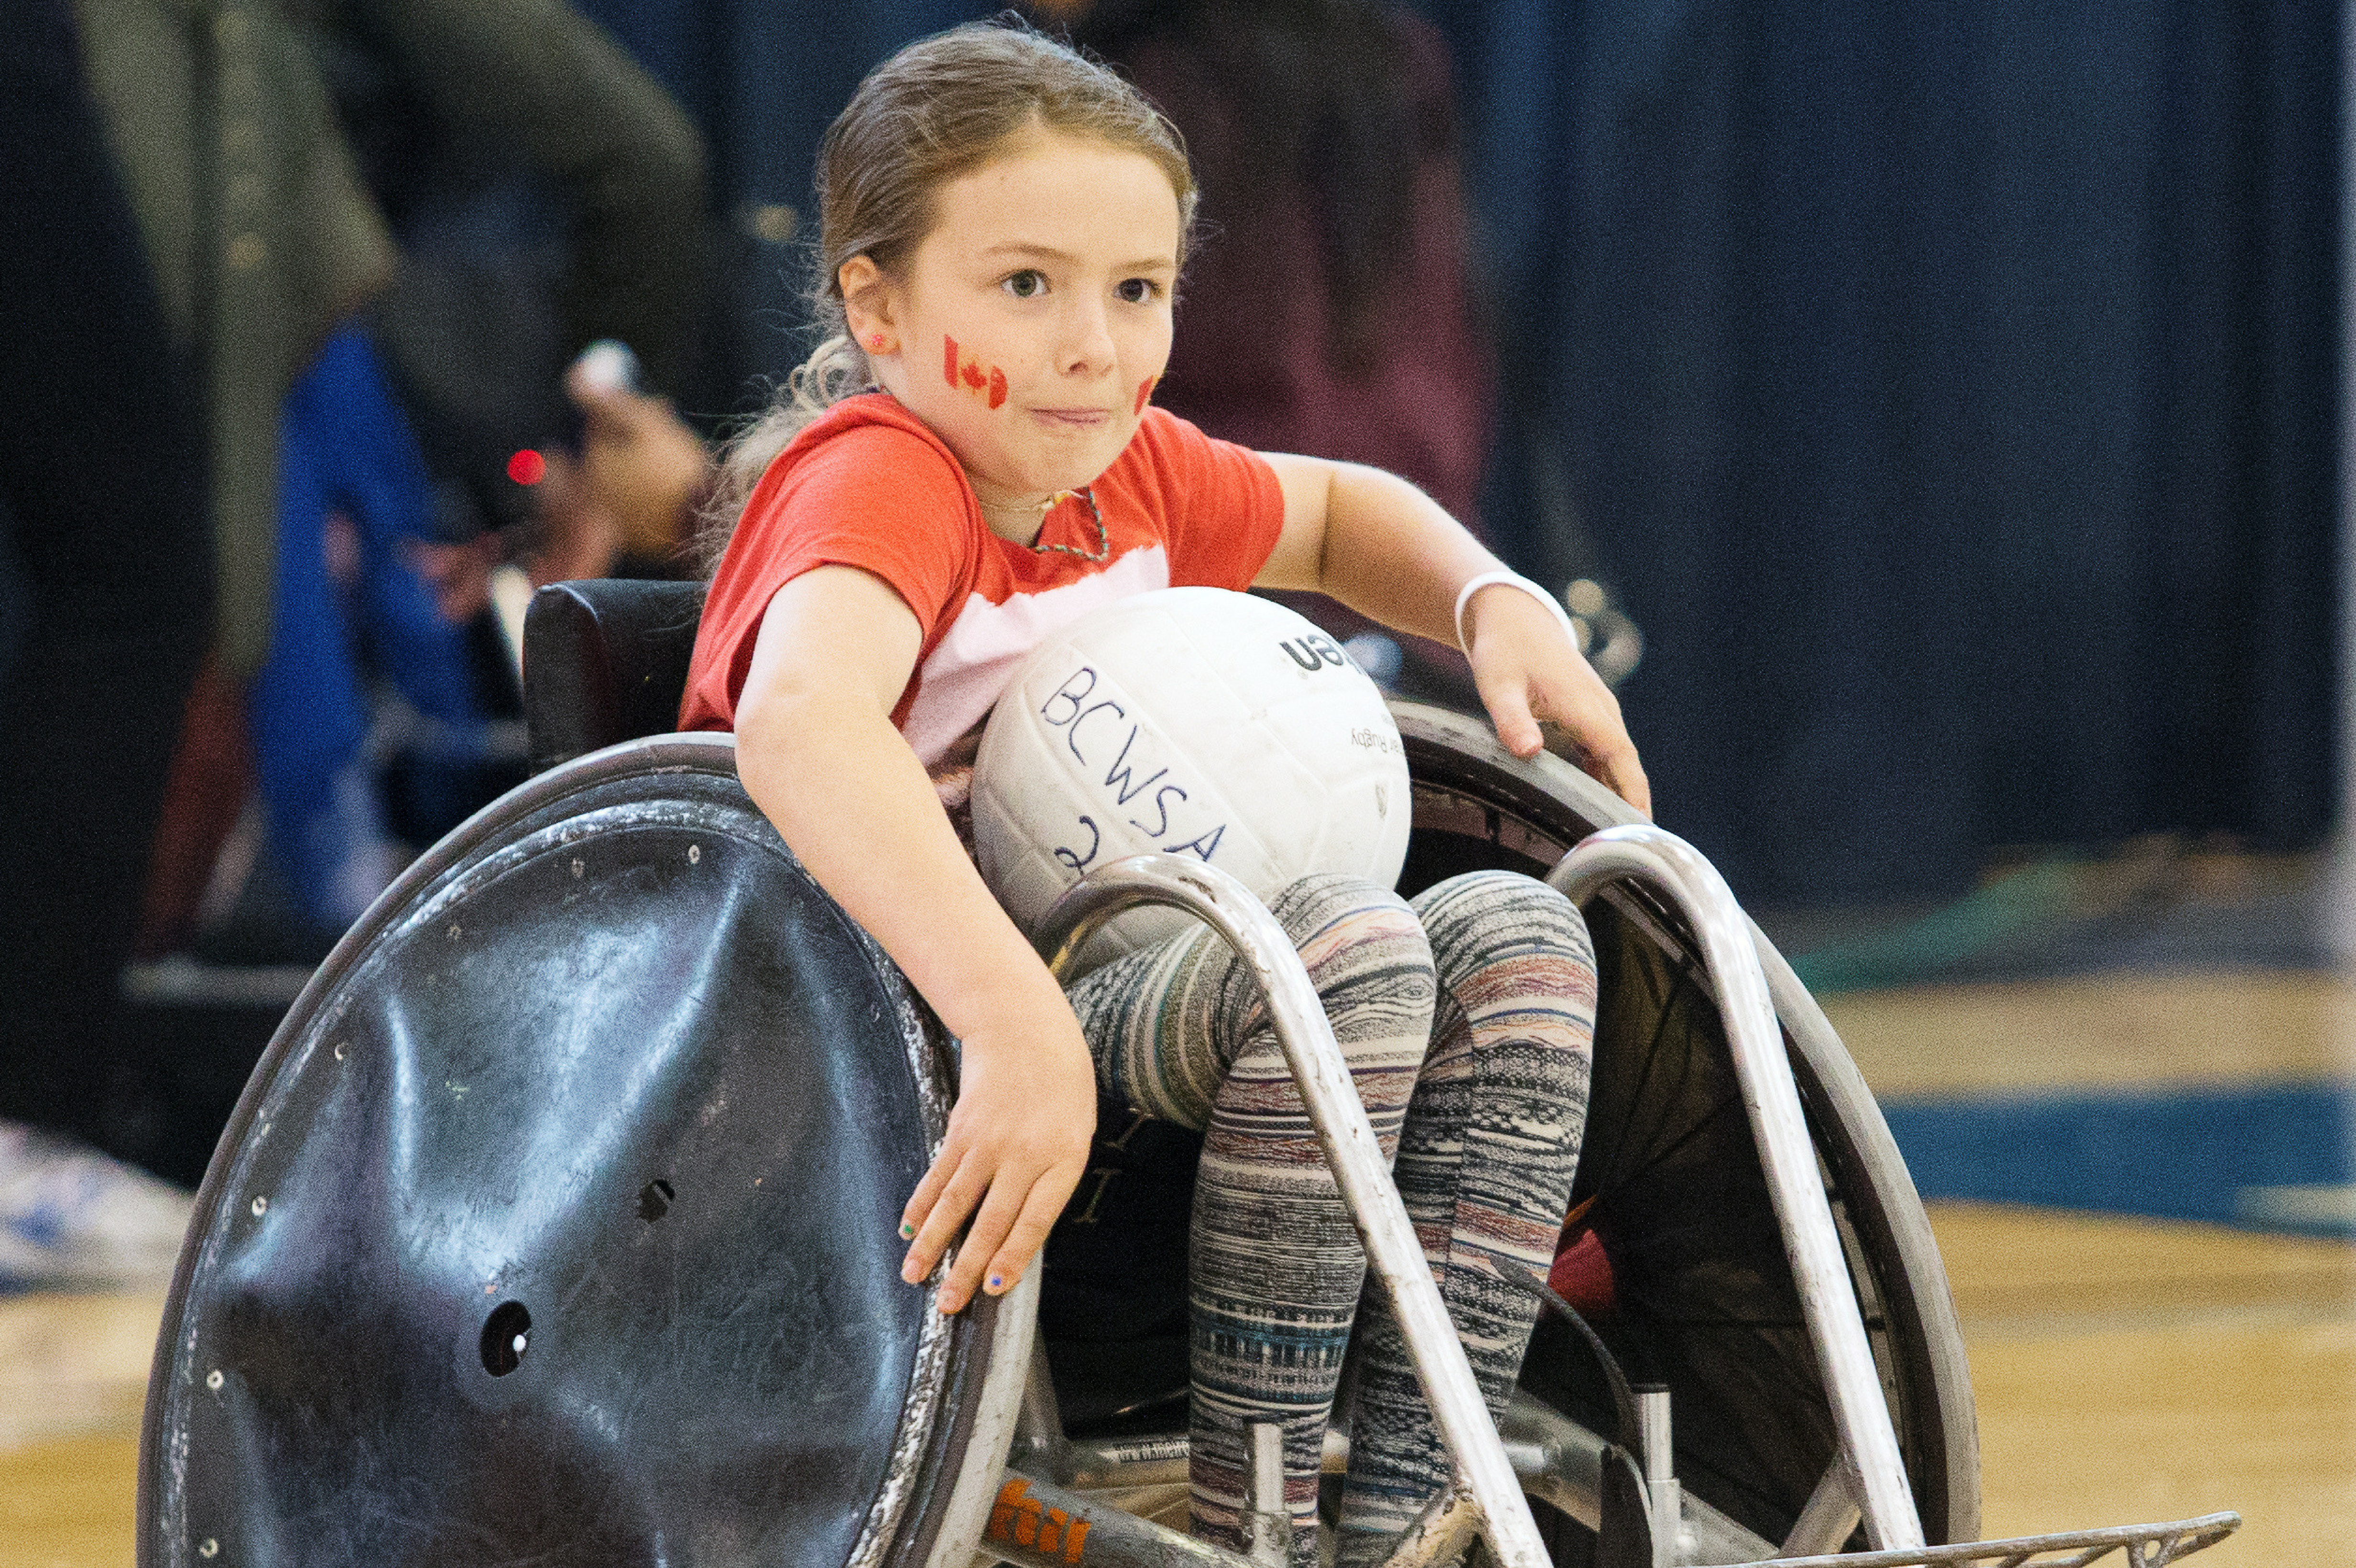 a young girl wheelchair rugby player with a warrior like look on her face